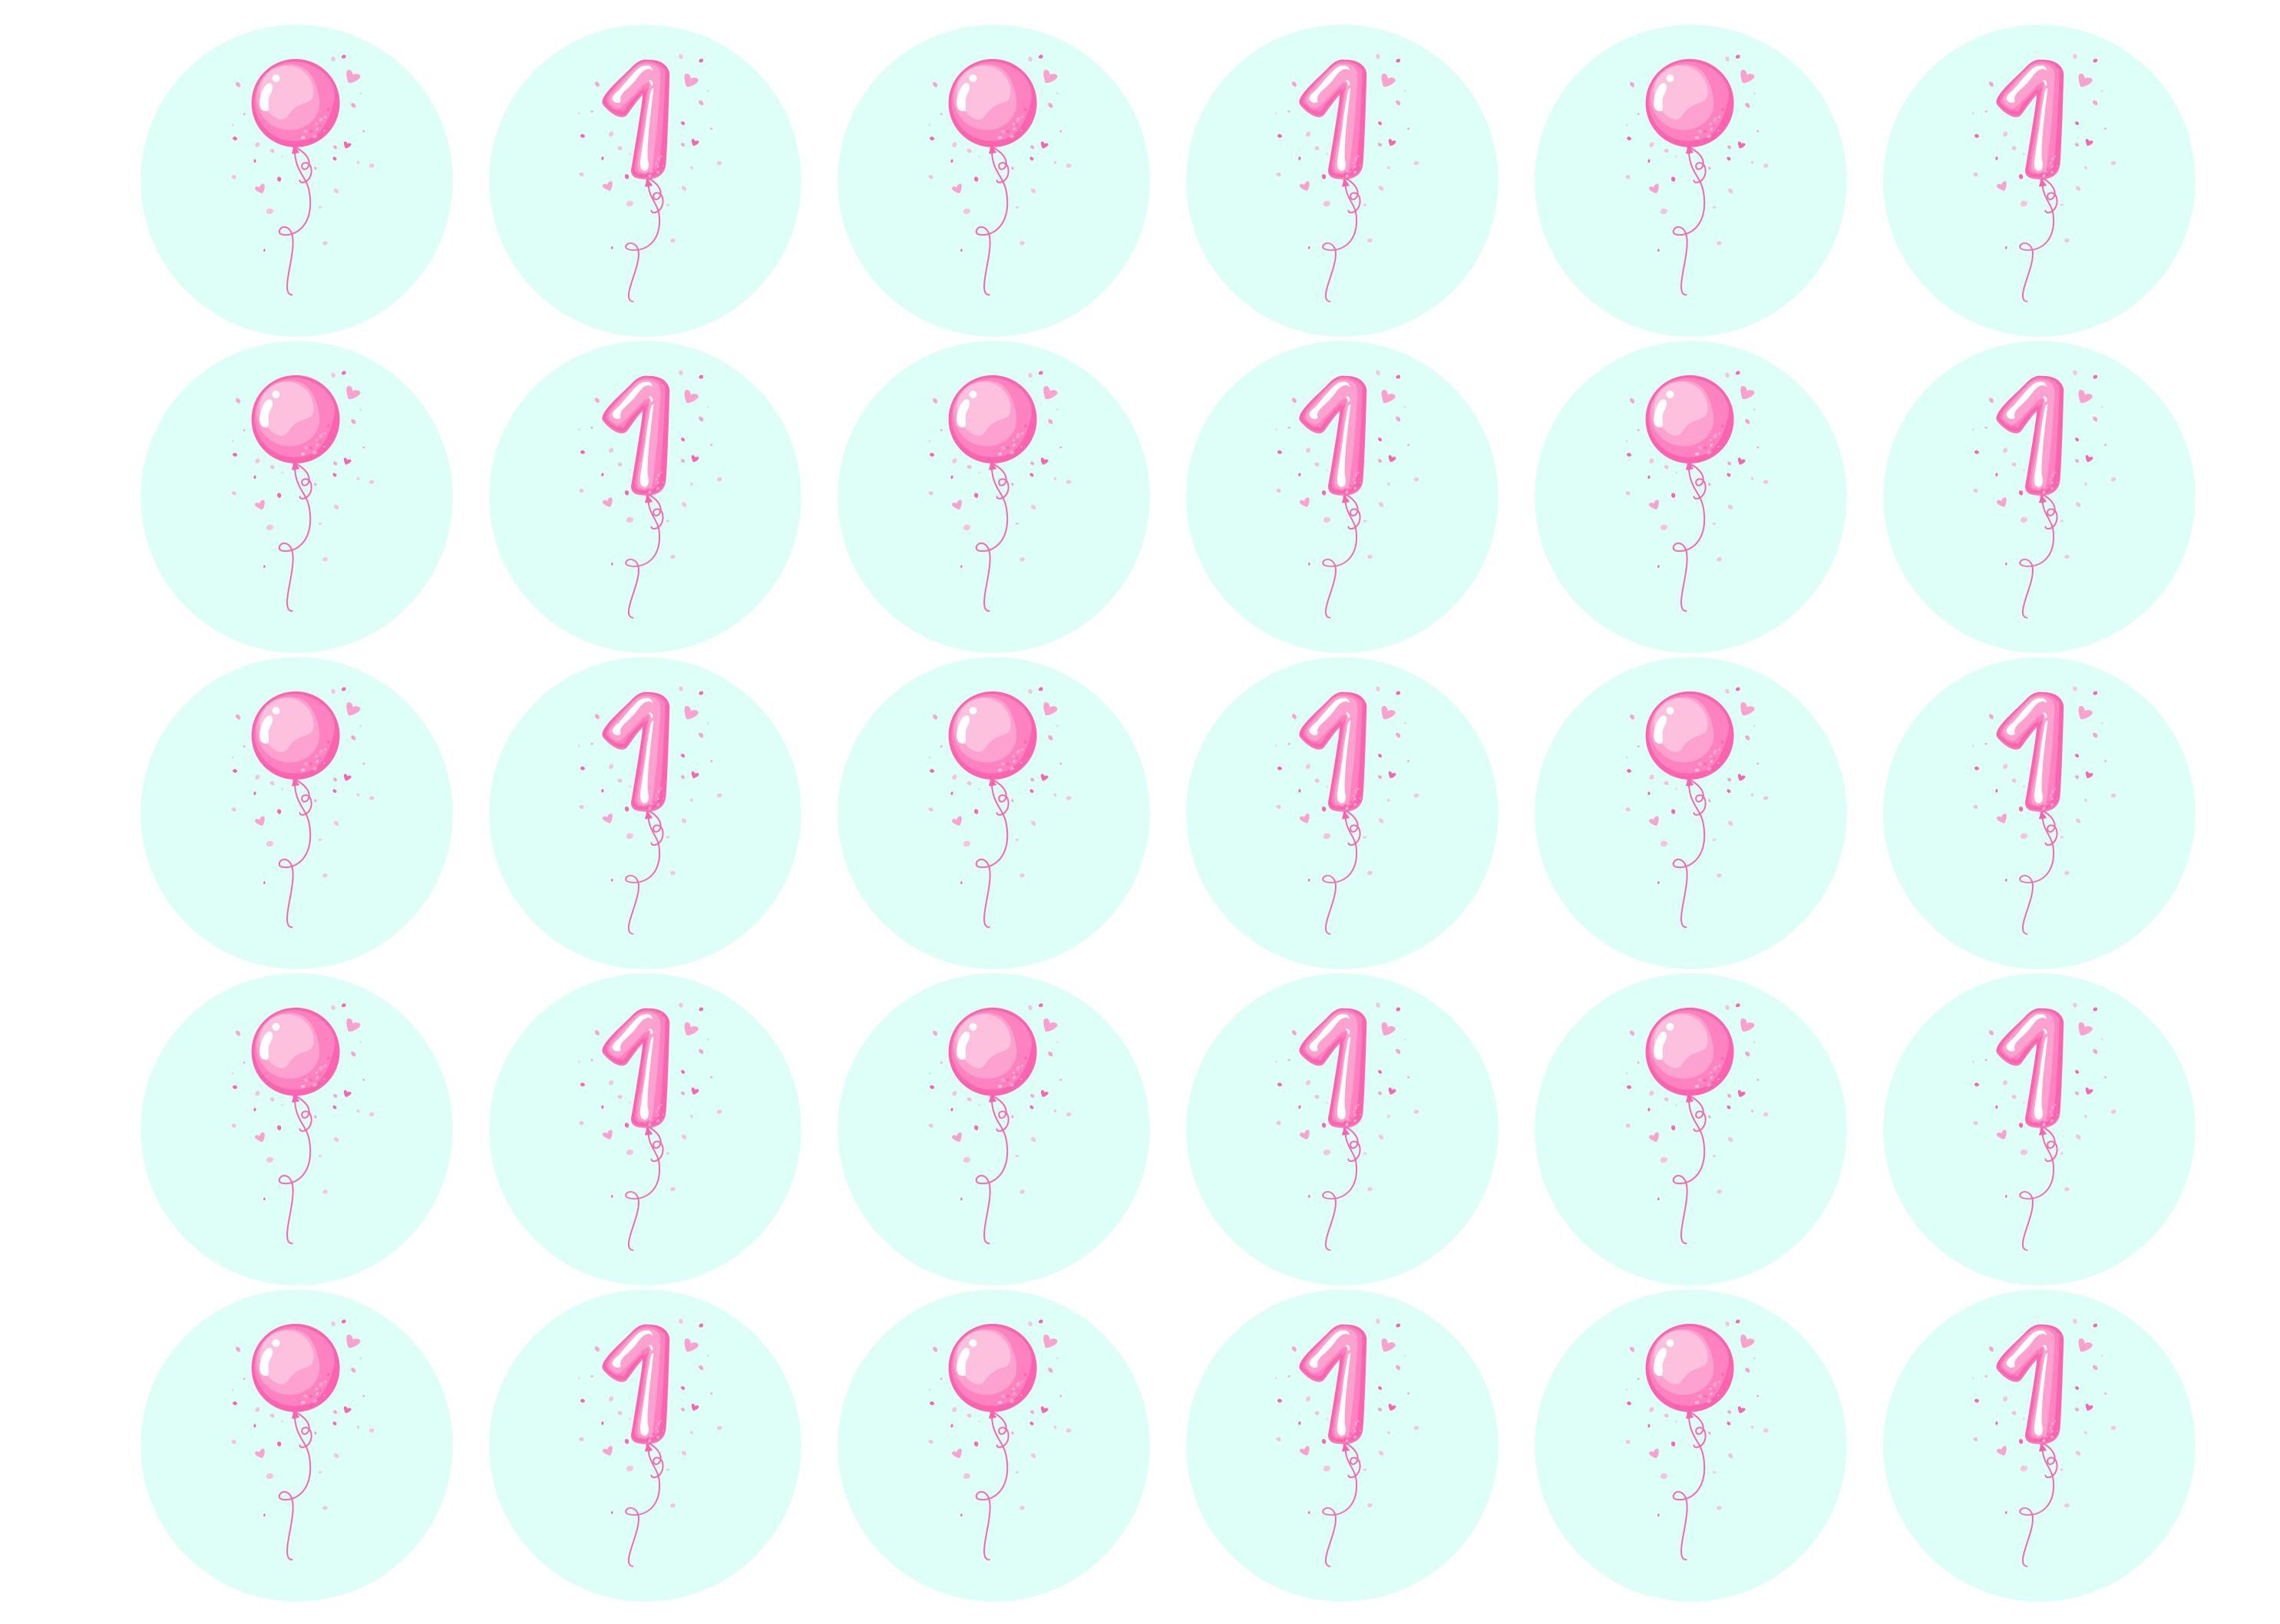 1st birthday cupcake toppers with a pink balloon design